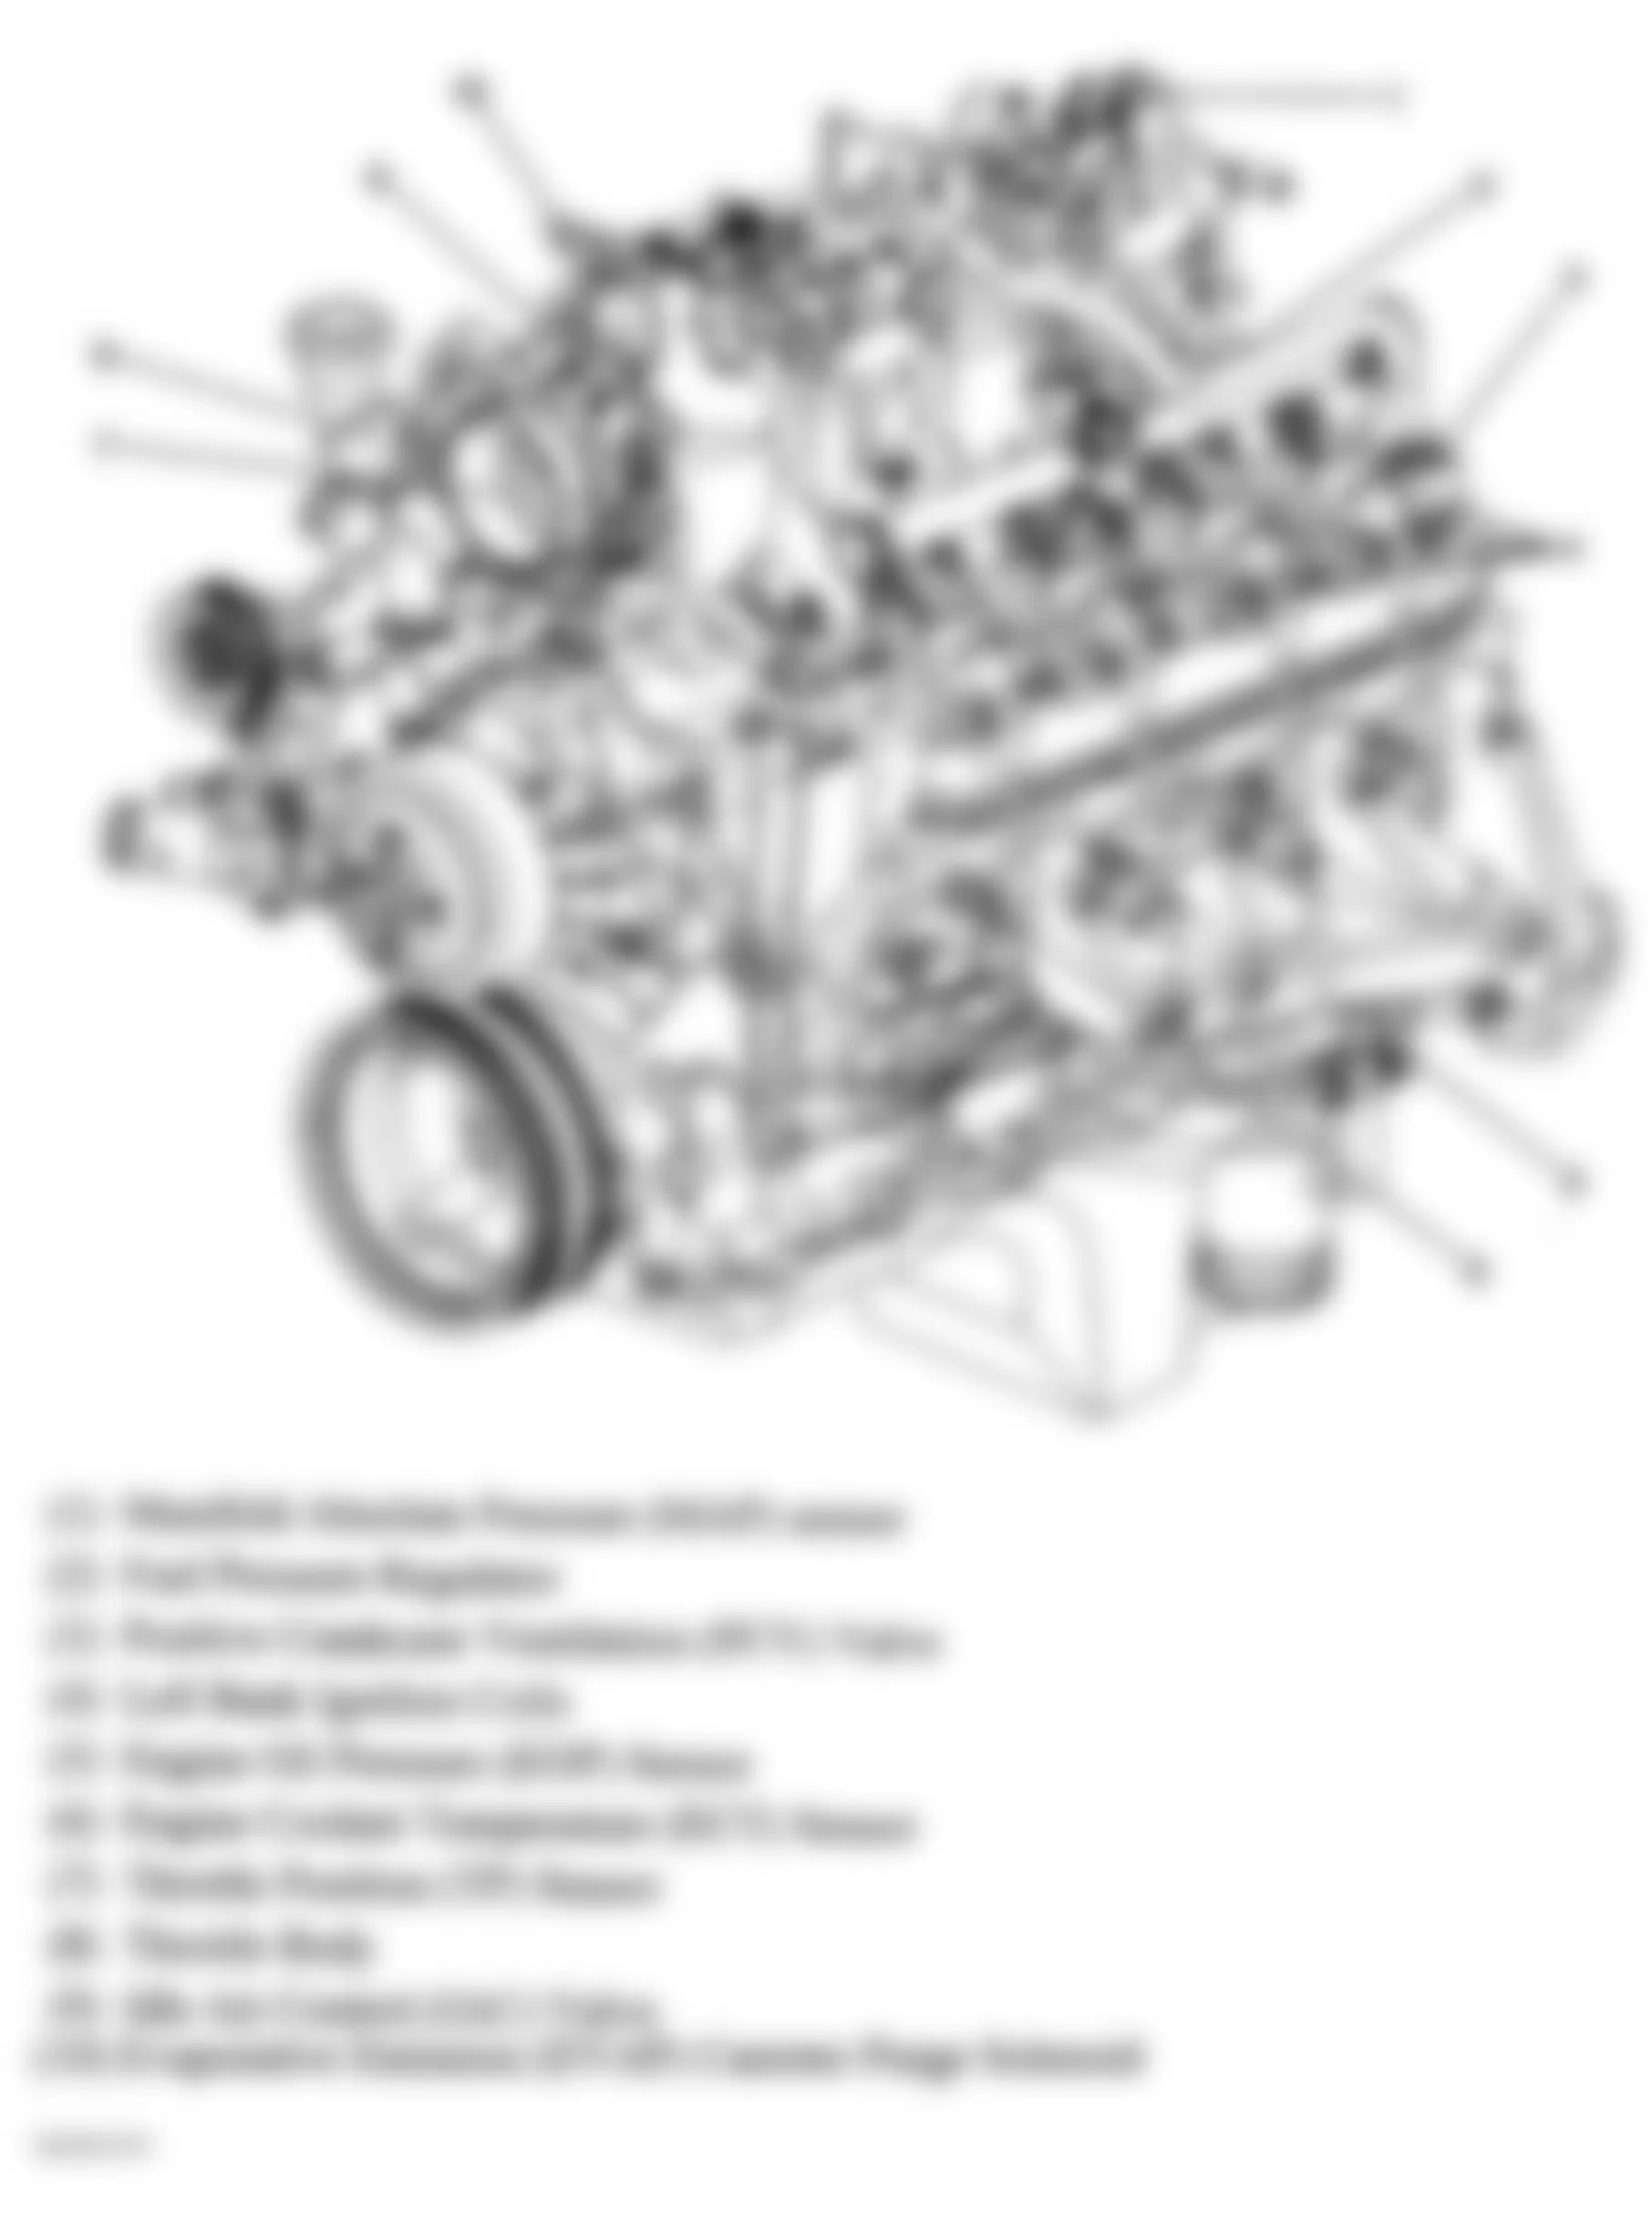 Chevrolet Avalanche 1500 2006 - Component Locations -  Left Side Of Engine (4.8L, 5.3L & 6.0L)